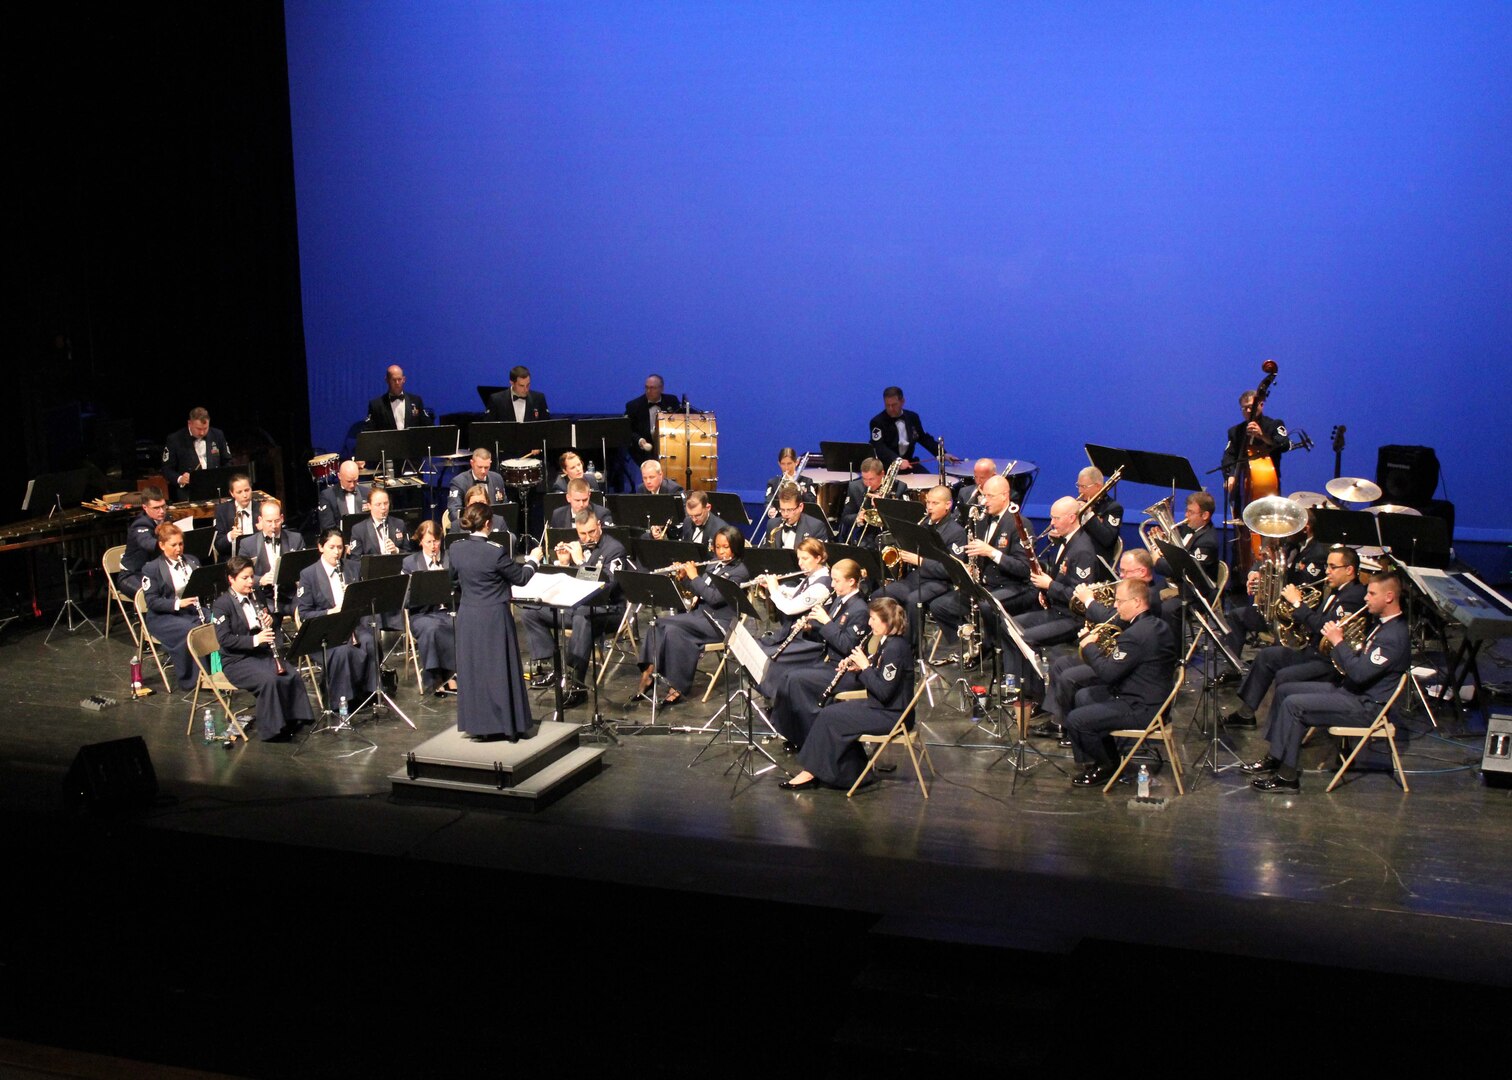 Holiday in Blue concerts to be held Dec. 10-11 at Laurie Auditorium